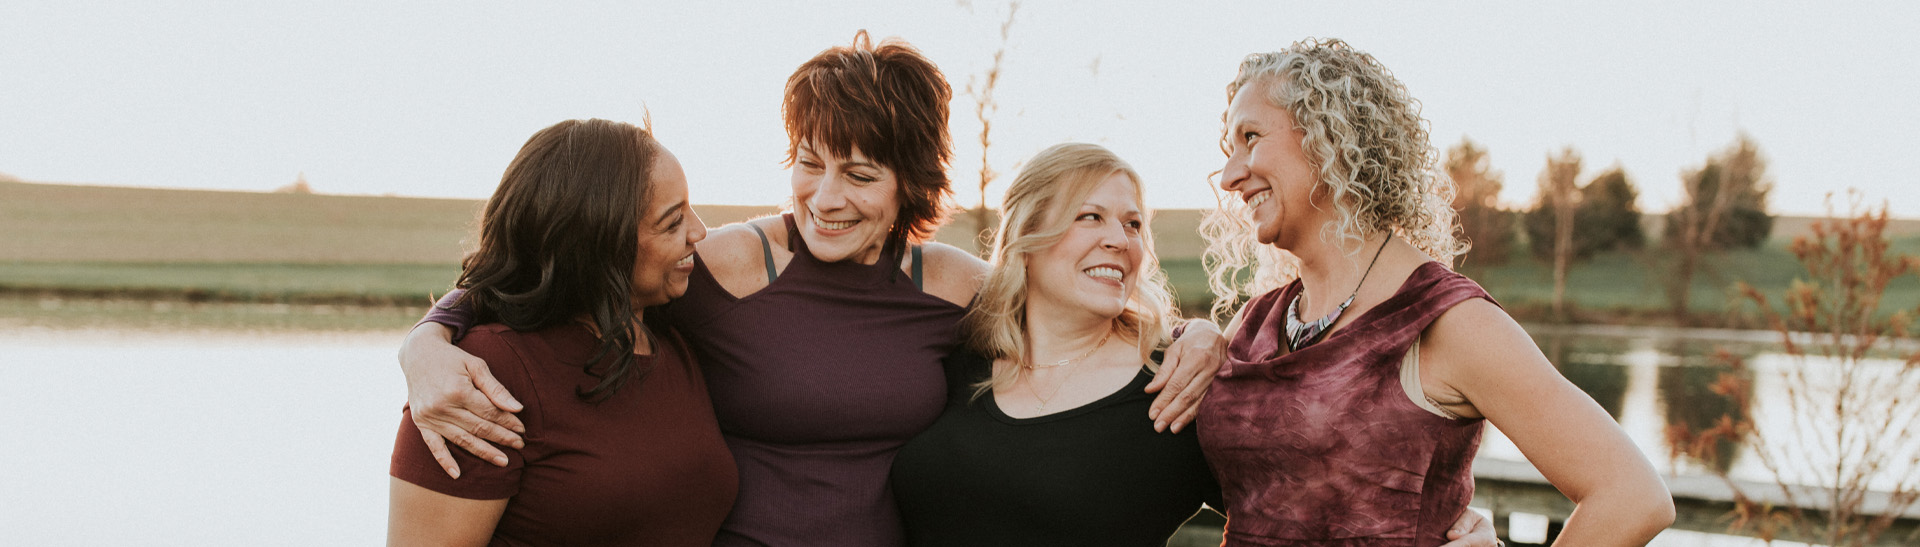 Four smiling middle-aged women